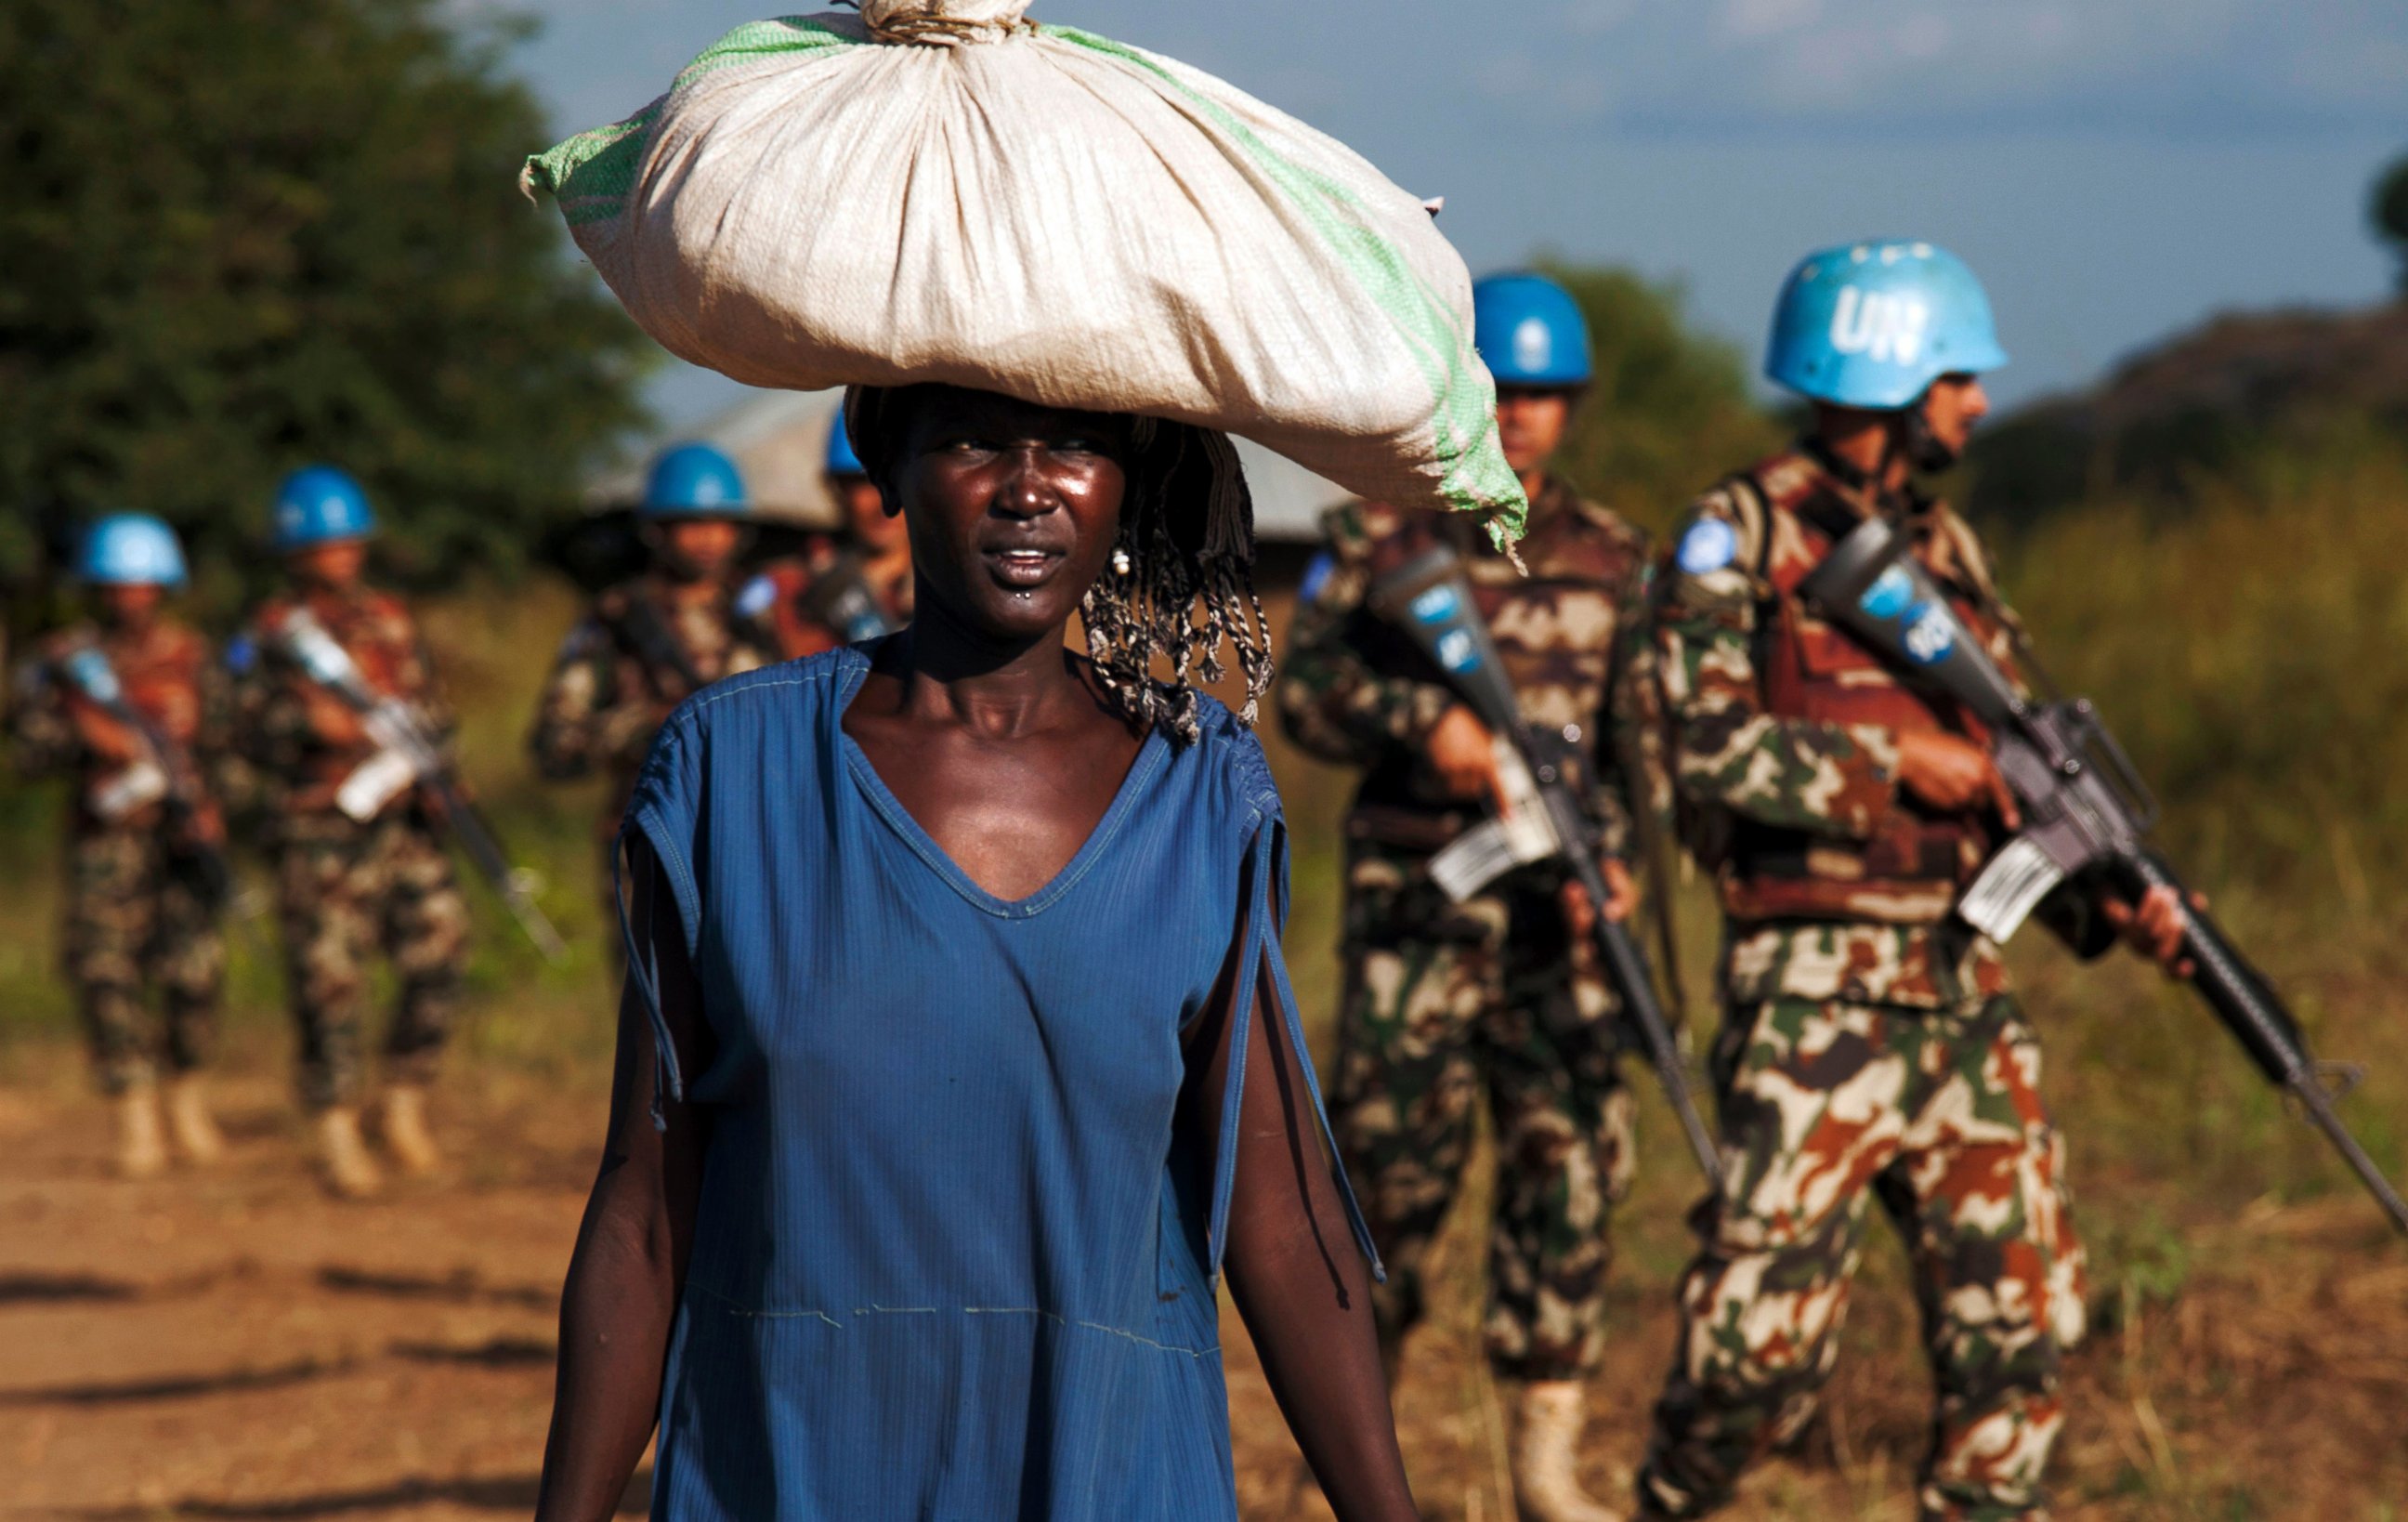 PHOTO: This file photo taken on Oct. 4, 2016 shows a displaced woman carrying goods as United Nations Mission in South Sudan (UNMISS) peacekeepers patrol outside the premises of the UN Protection of Civilians (PoC) site in Juba.